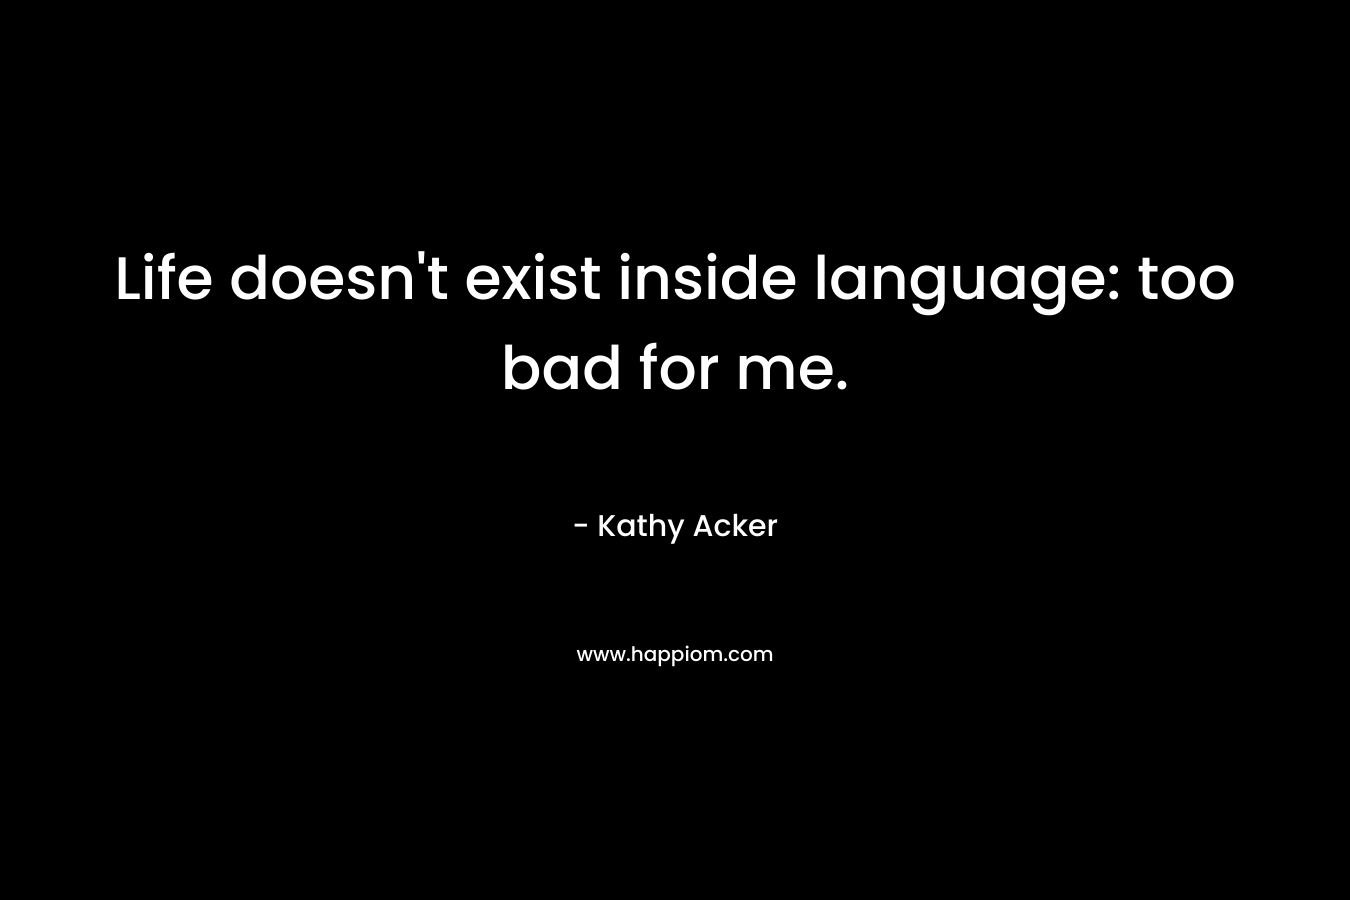 Life doesn’t exist inside language: too bad for me. – Kathy Acker